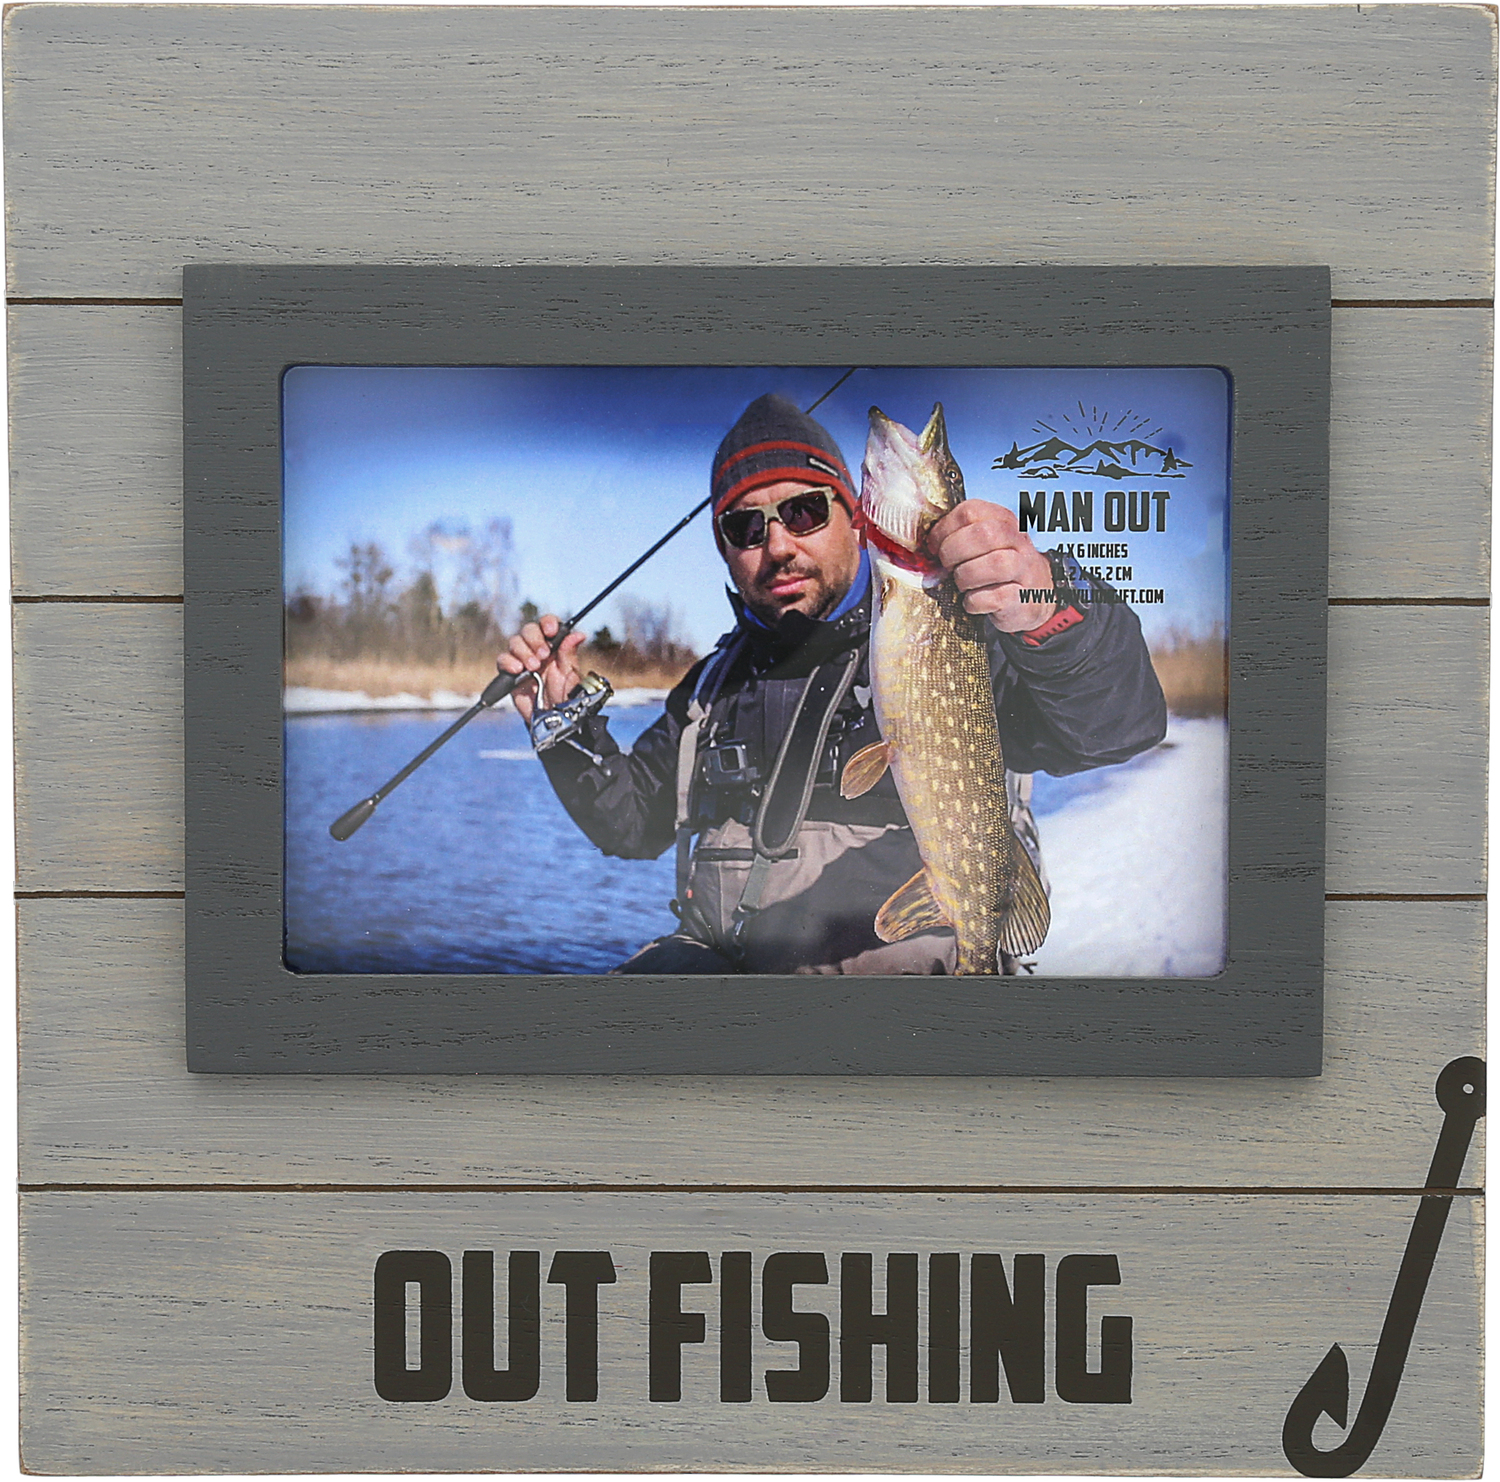 Fishing by Man Out - Fishing - 8.75" Frame
(Holds 6" x 4" Photo)